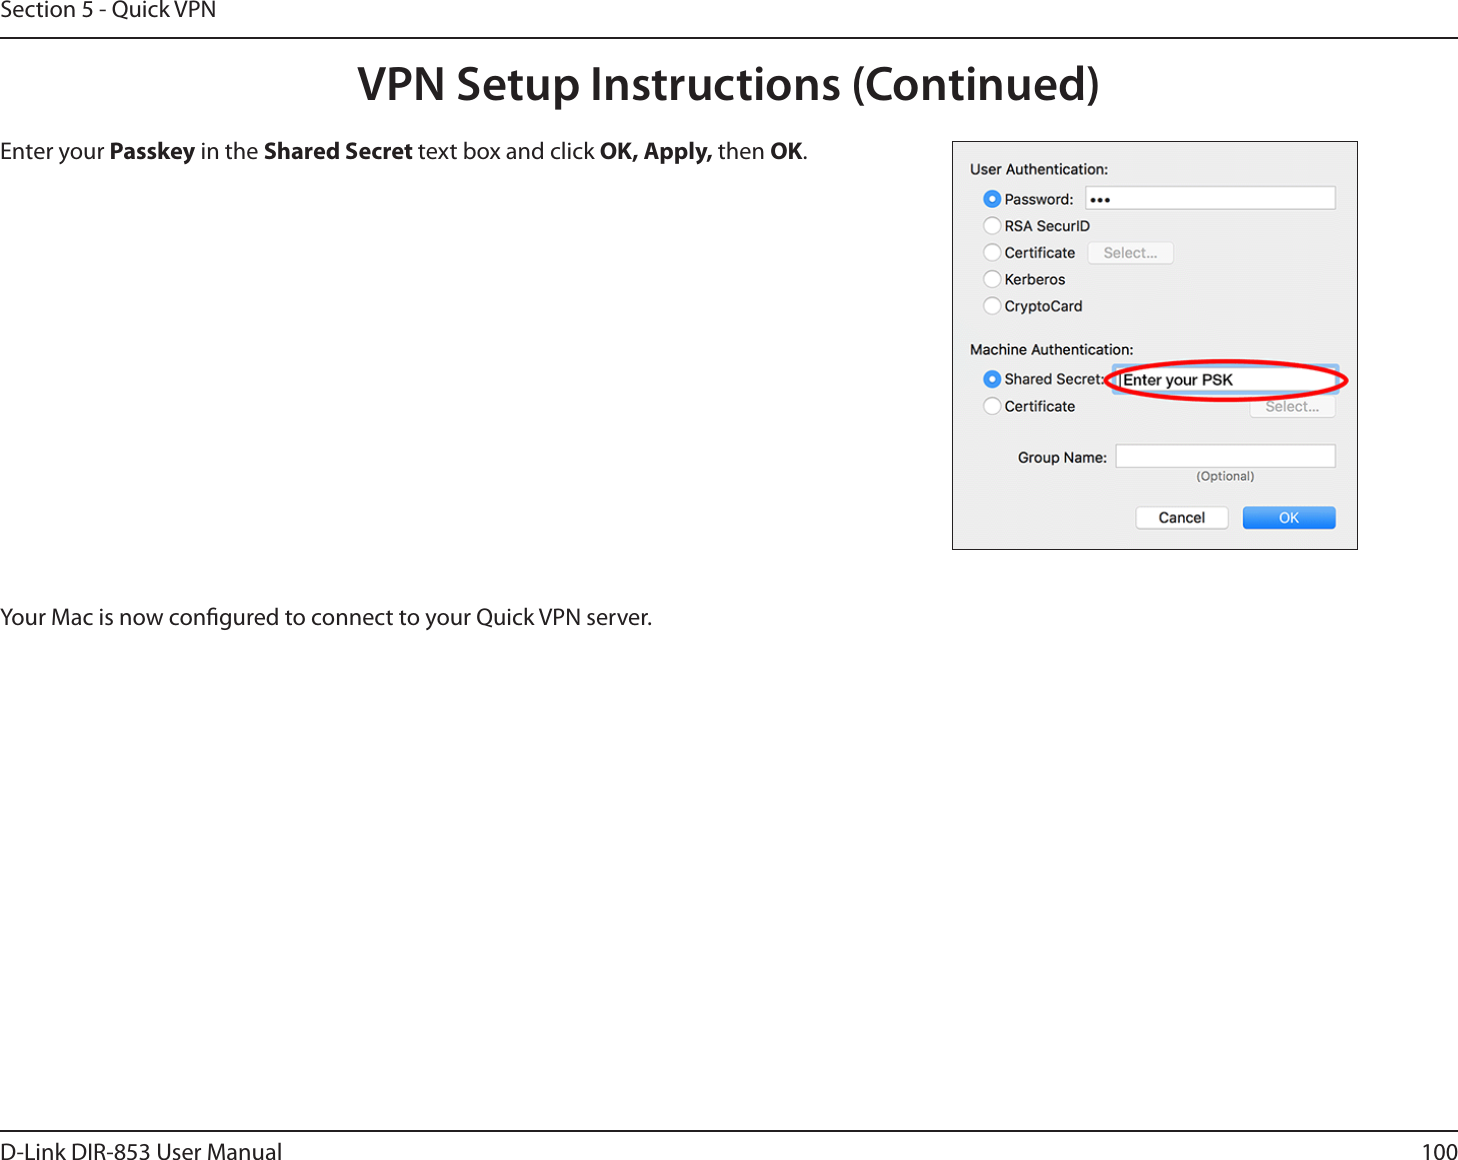 100D-Link DIR-853 User ManualSection 5 - Quick VPNEnter your Passkey in the Shared Secret text box and click OK, Apply, then OK.Your Mac is now congured to connect to your Quick VPN server.VPN Setup Instructions (Continued)